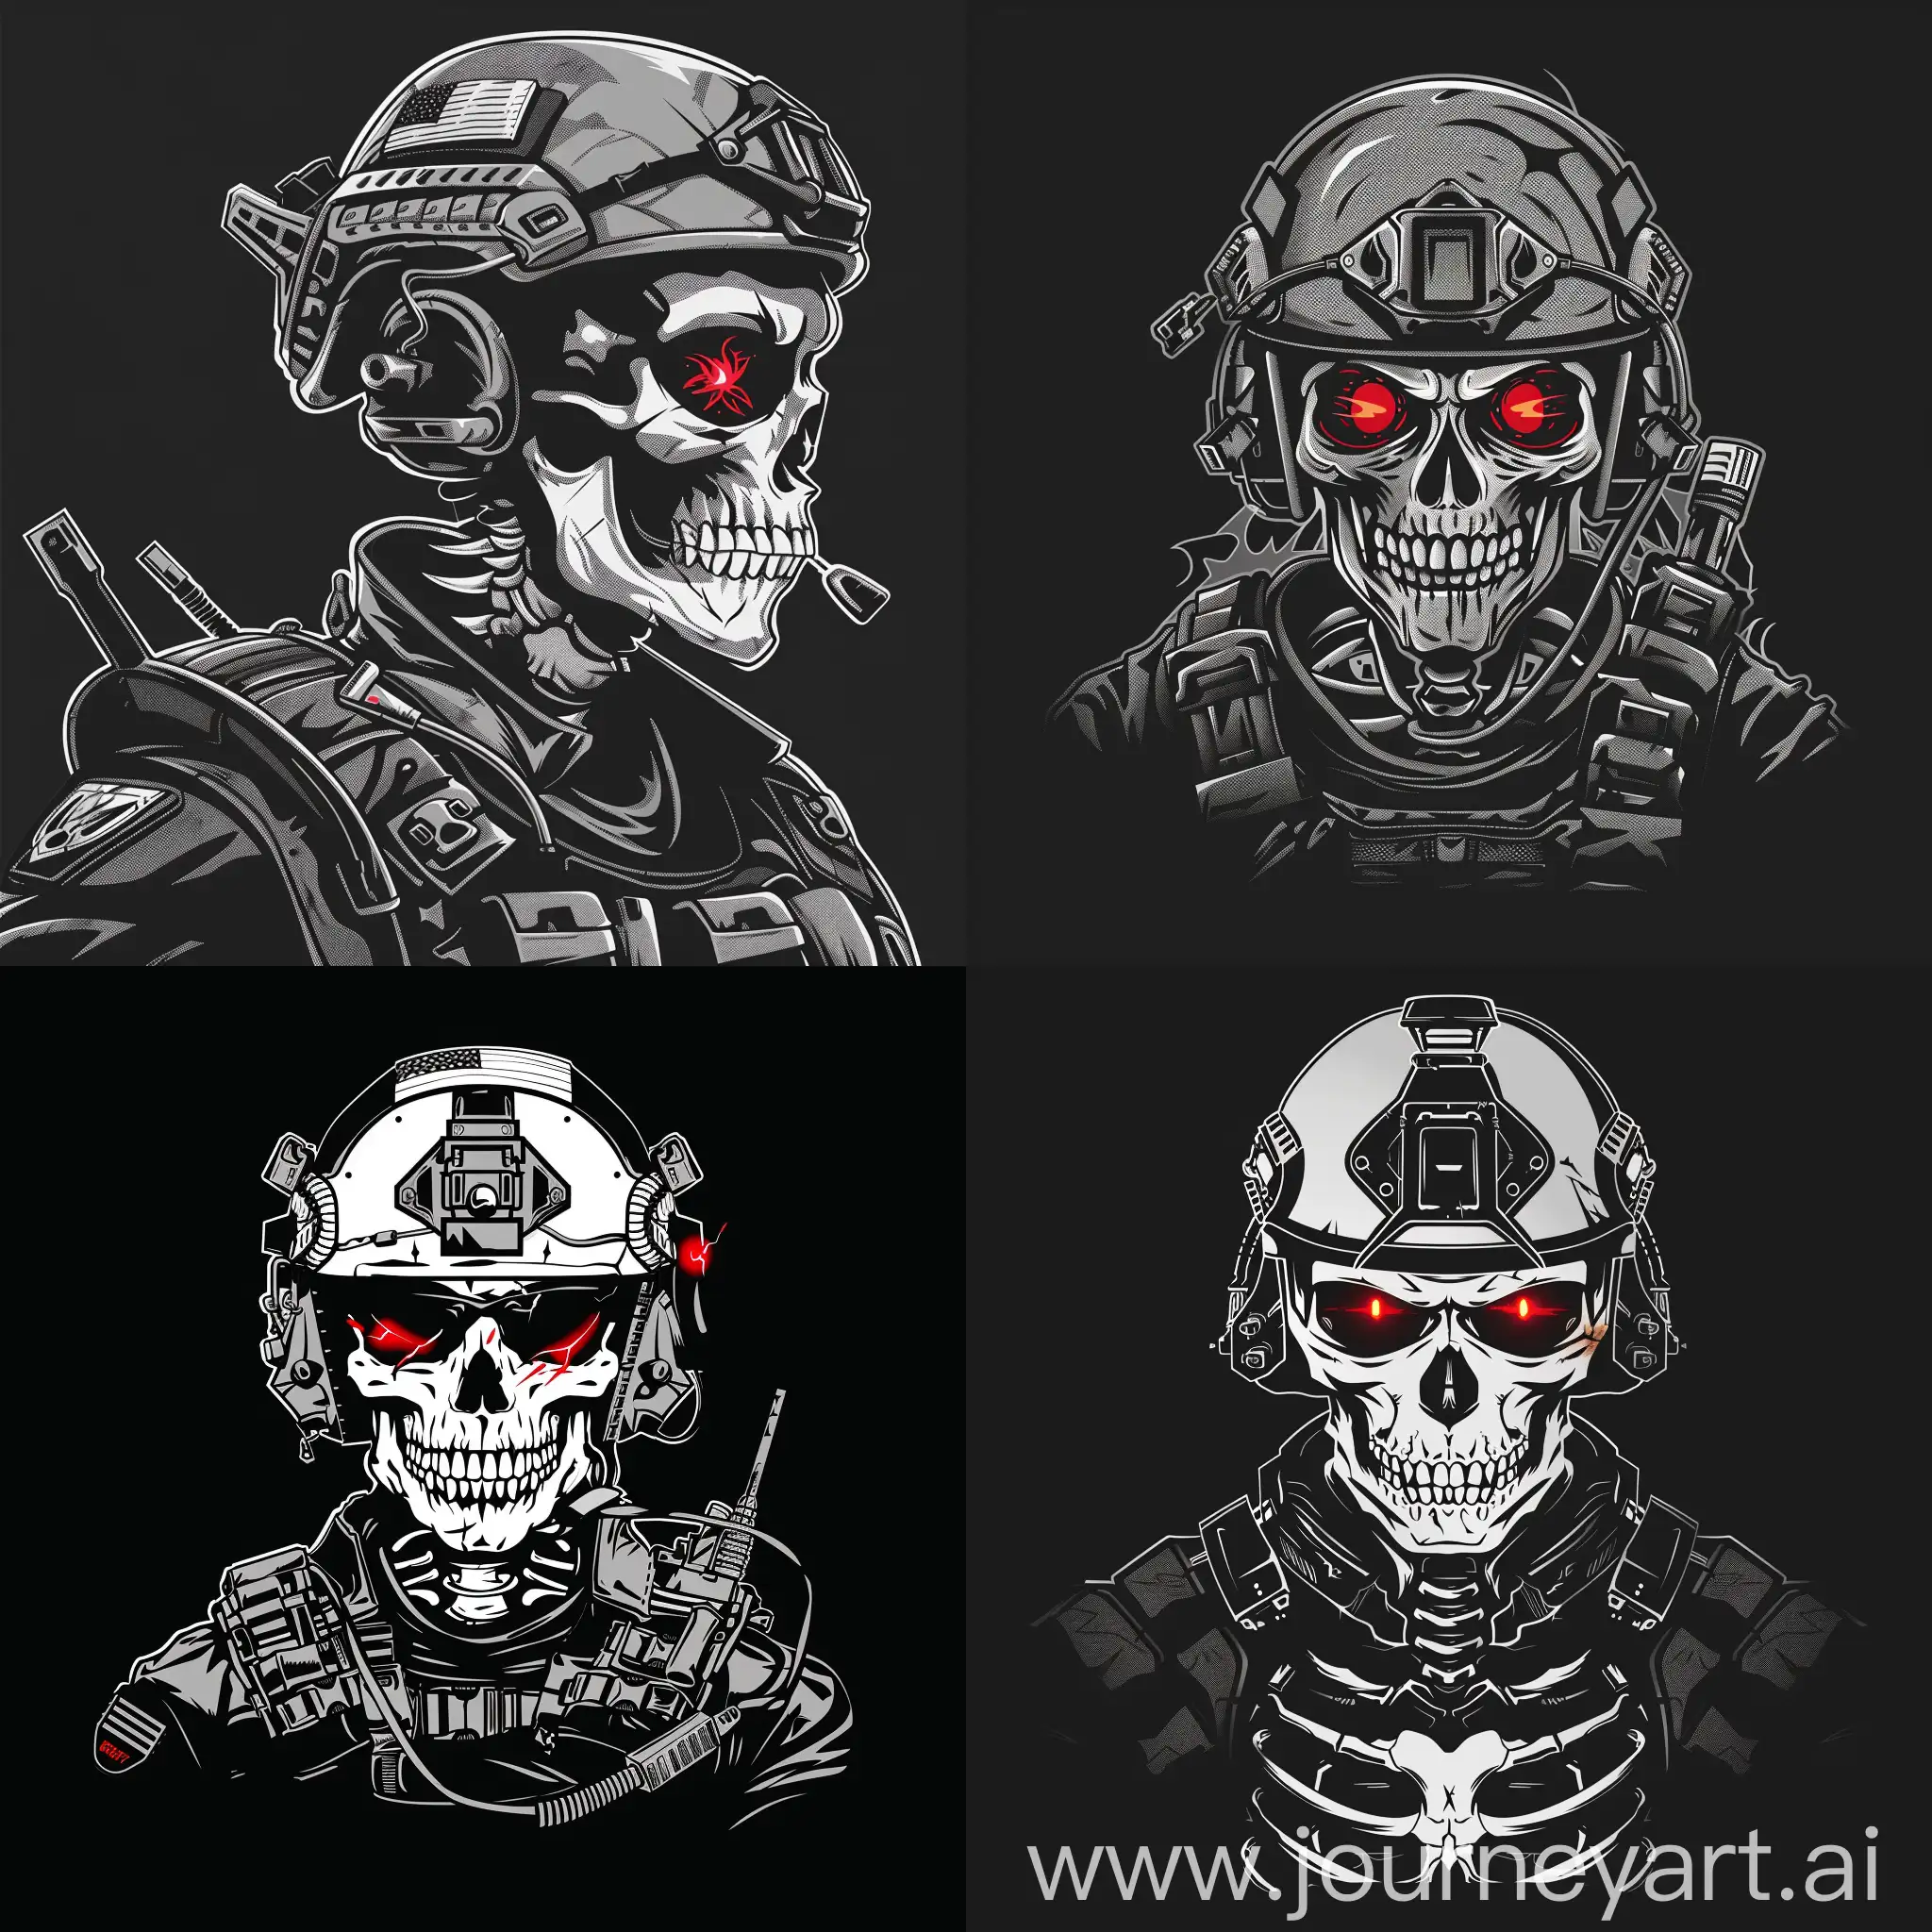 5 undead soldier look like a skeleton with modern military equipment, logo, burning red eyes, modern military helmet, black and white, black background